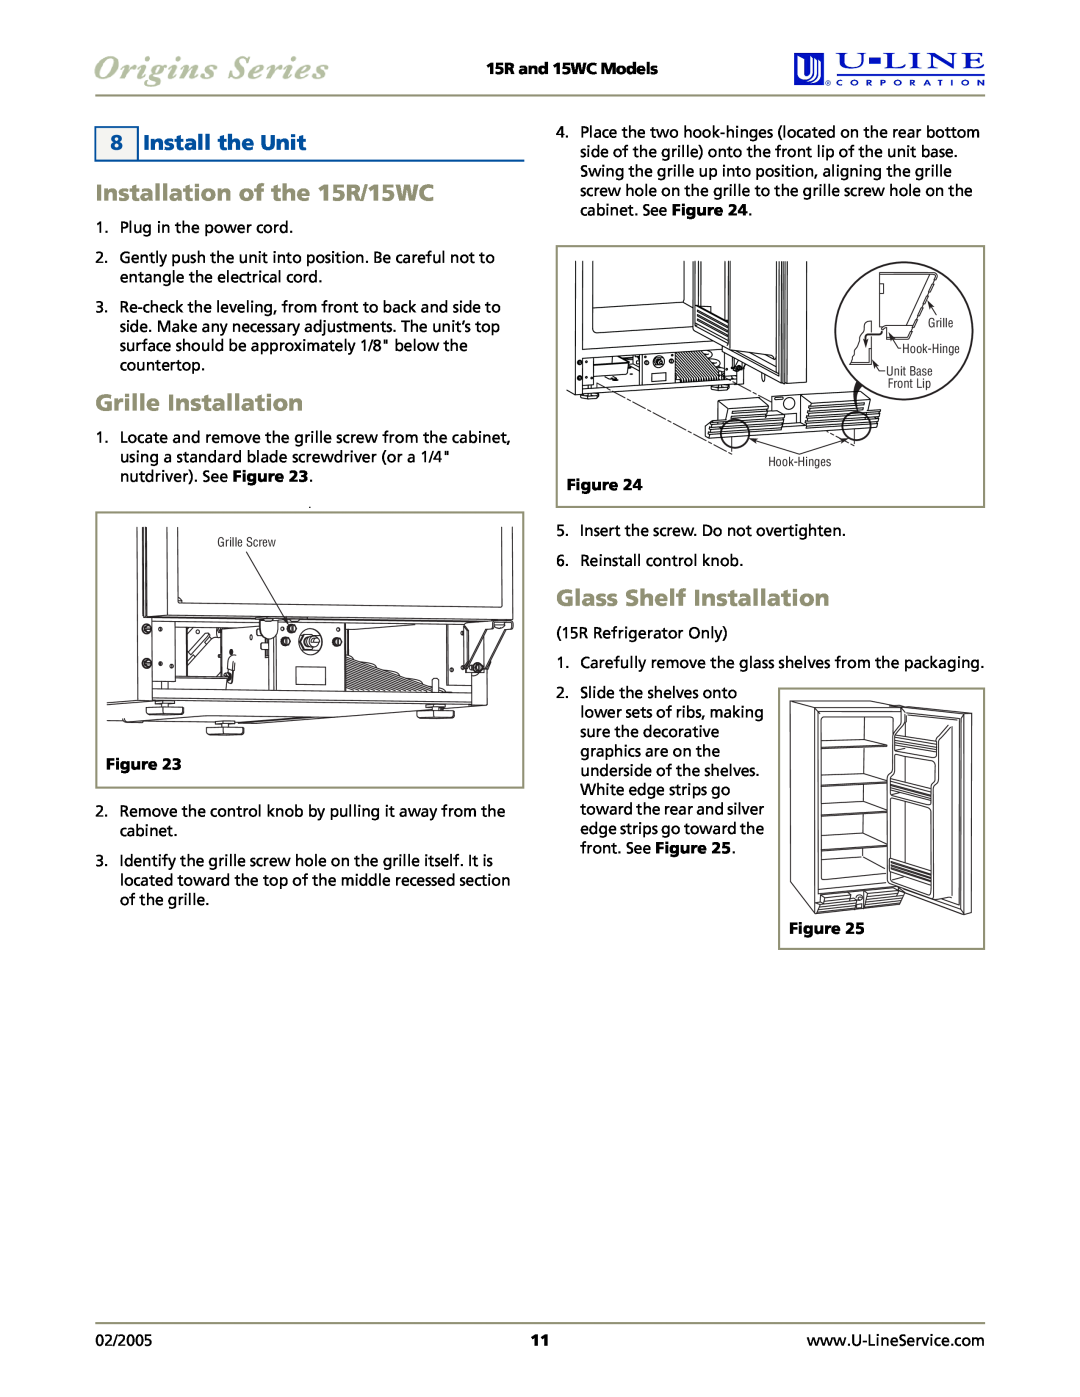 U-Line manual Installation of the 15R/15WC, Grille Installation, Glass Shelf Installation, Install the Unit 